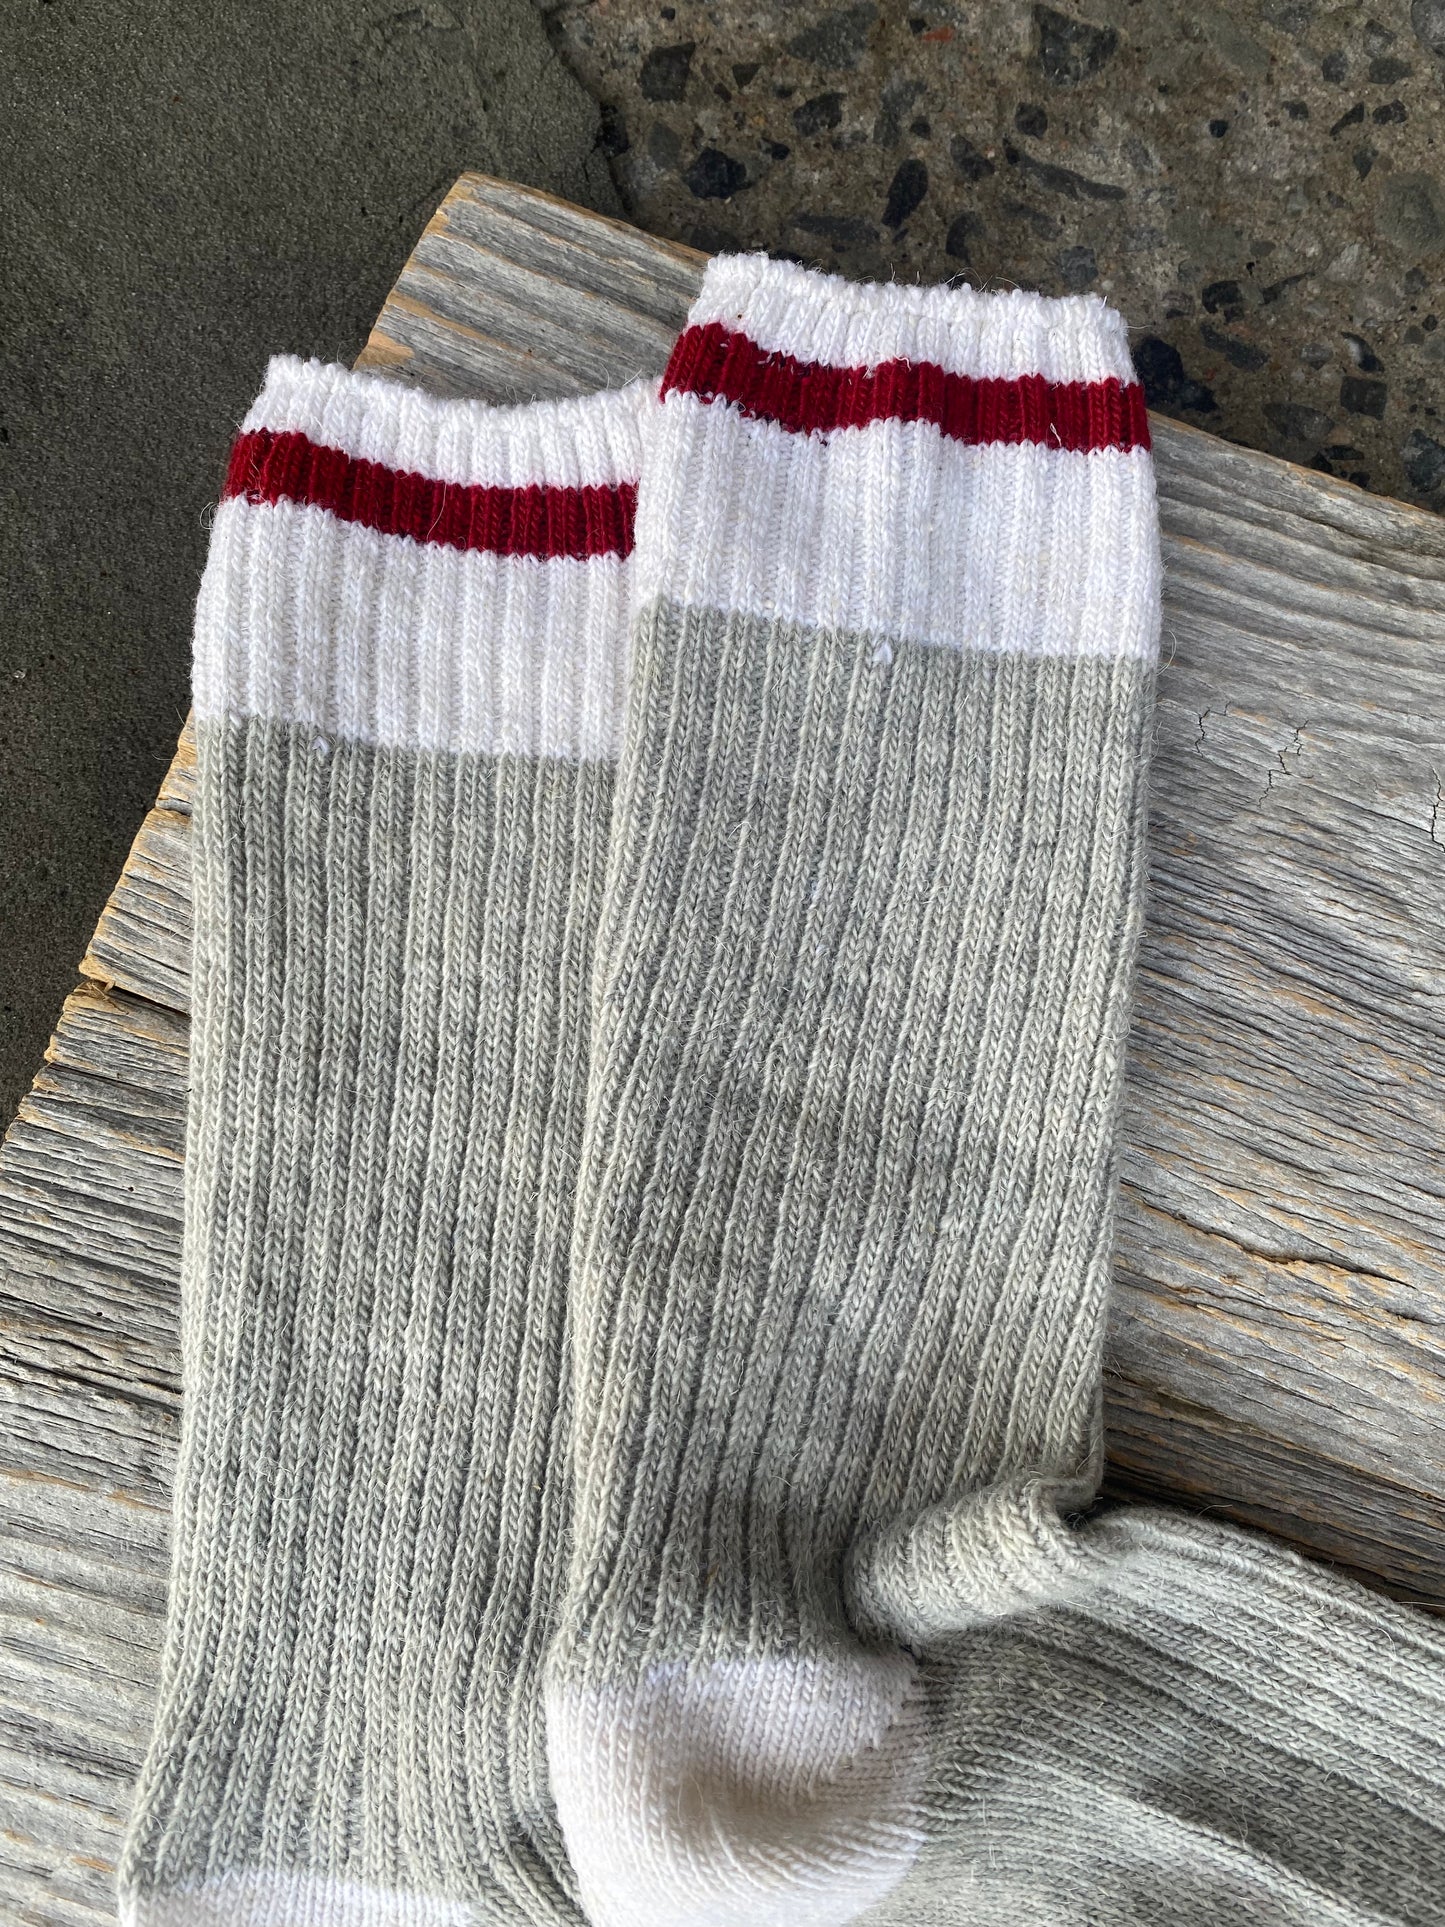 Stunning Cotton Lumber Socks "From Head to Toe" RED OR BLACK